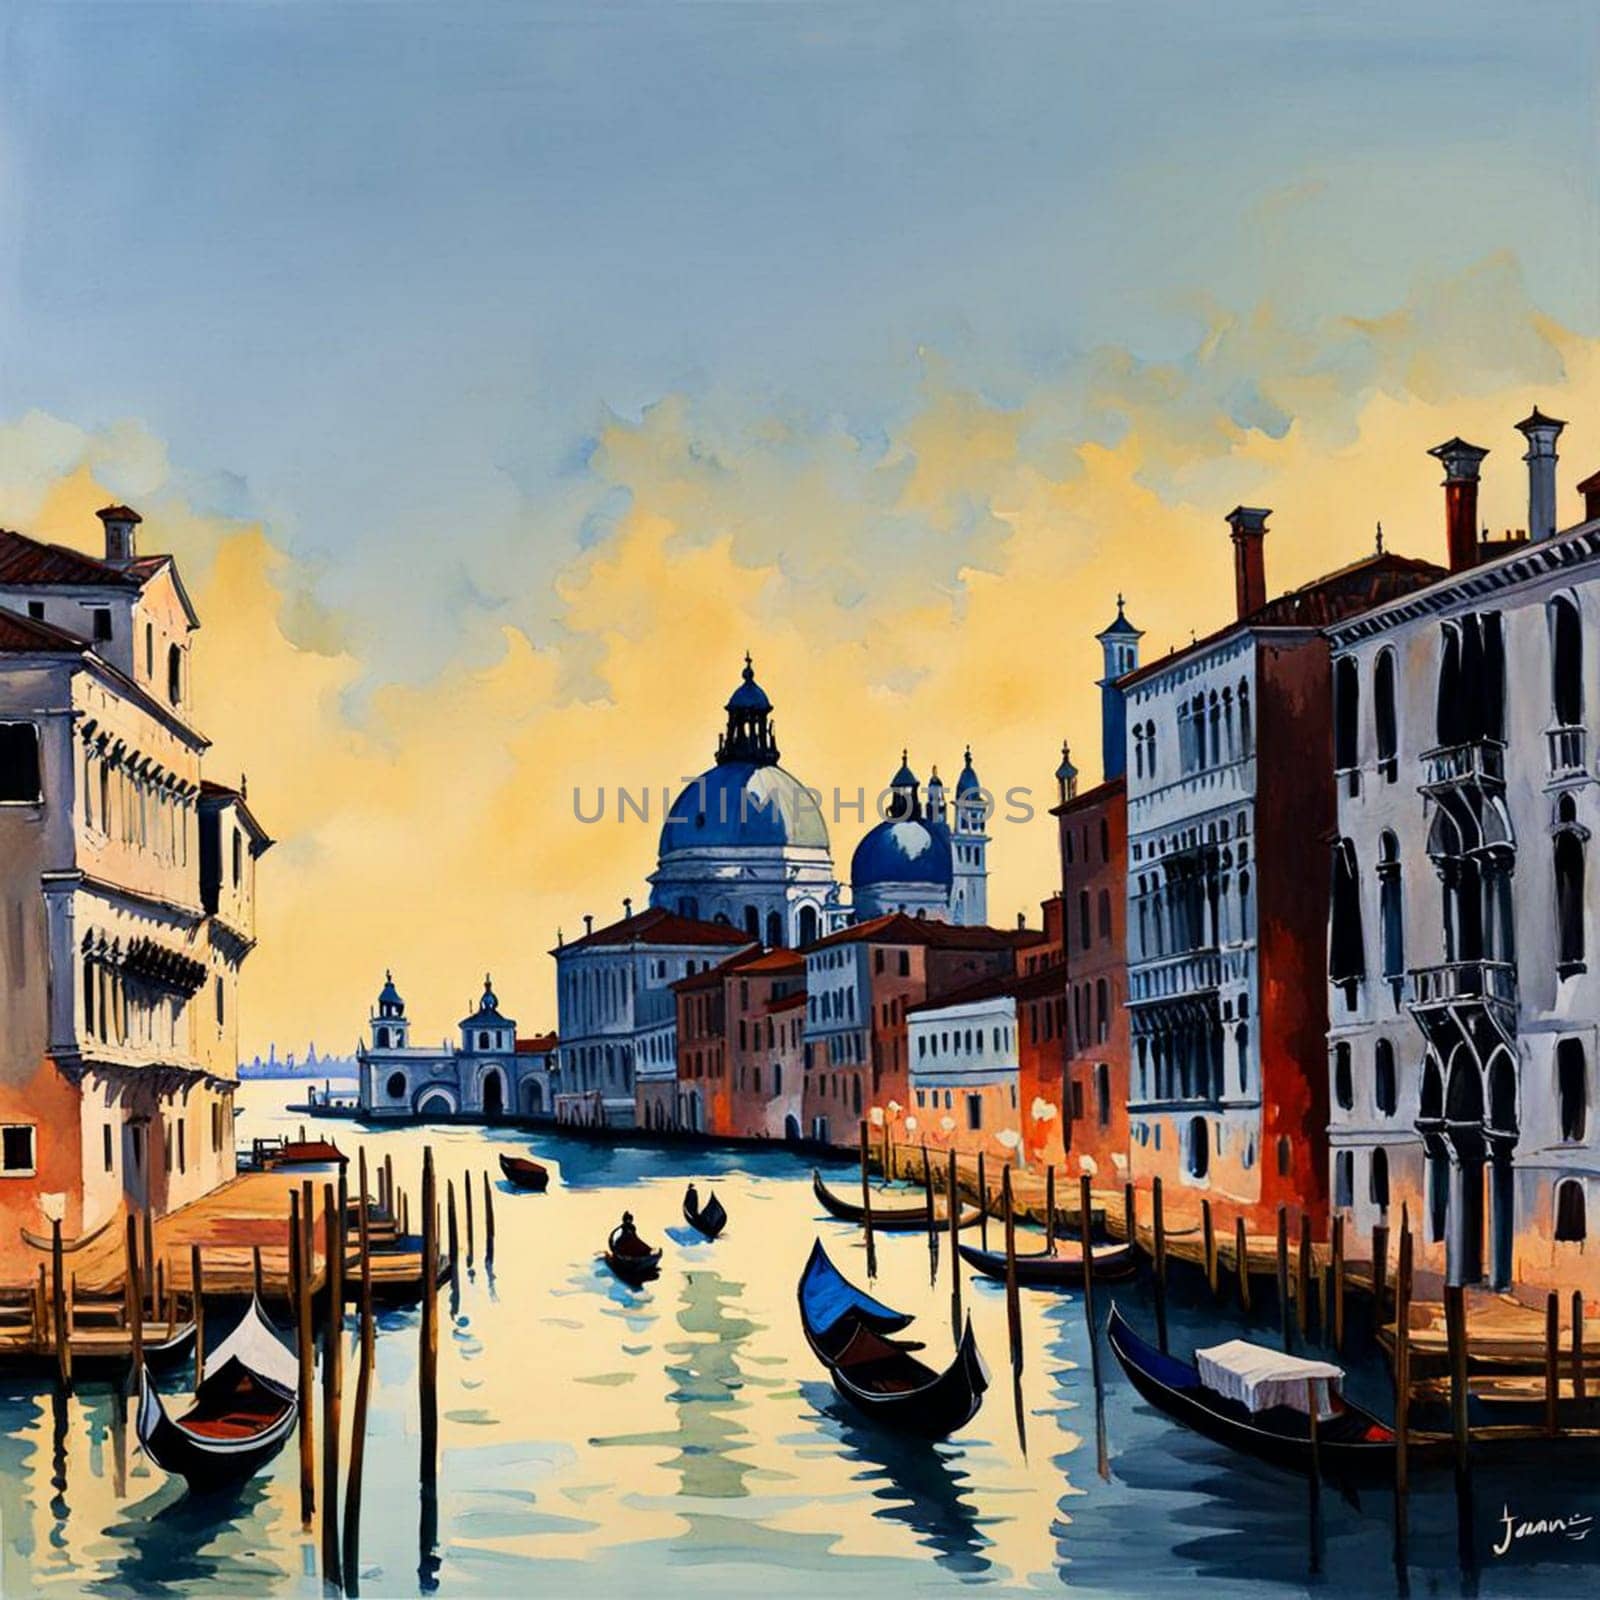 Oil painting of Venetian architecture and water canal in Venice by Vailatese46